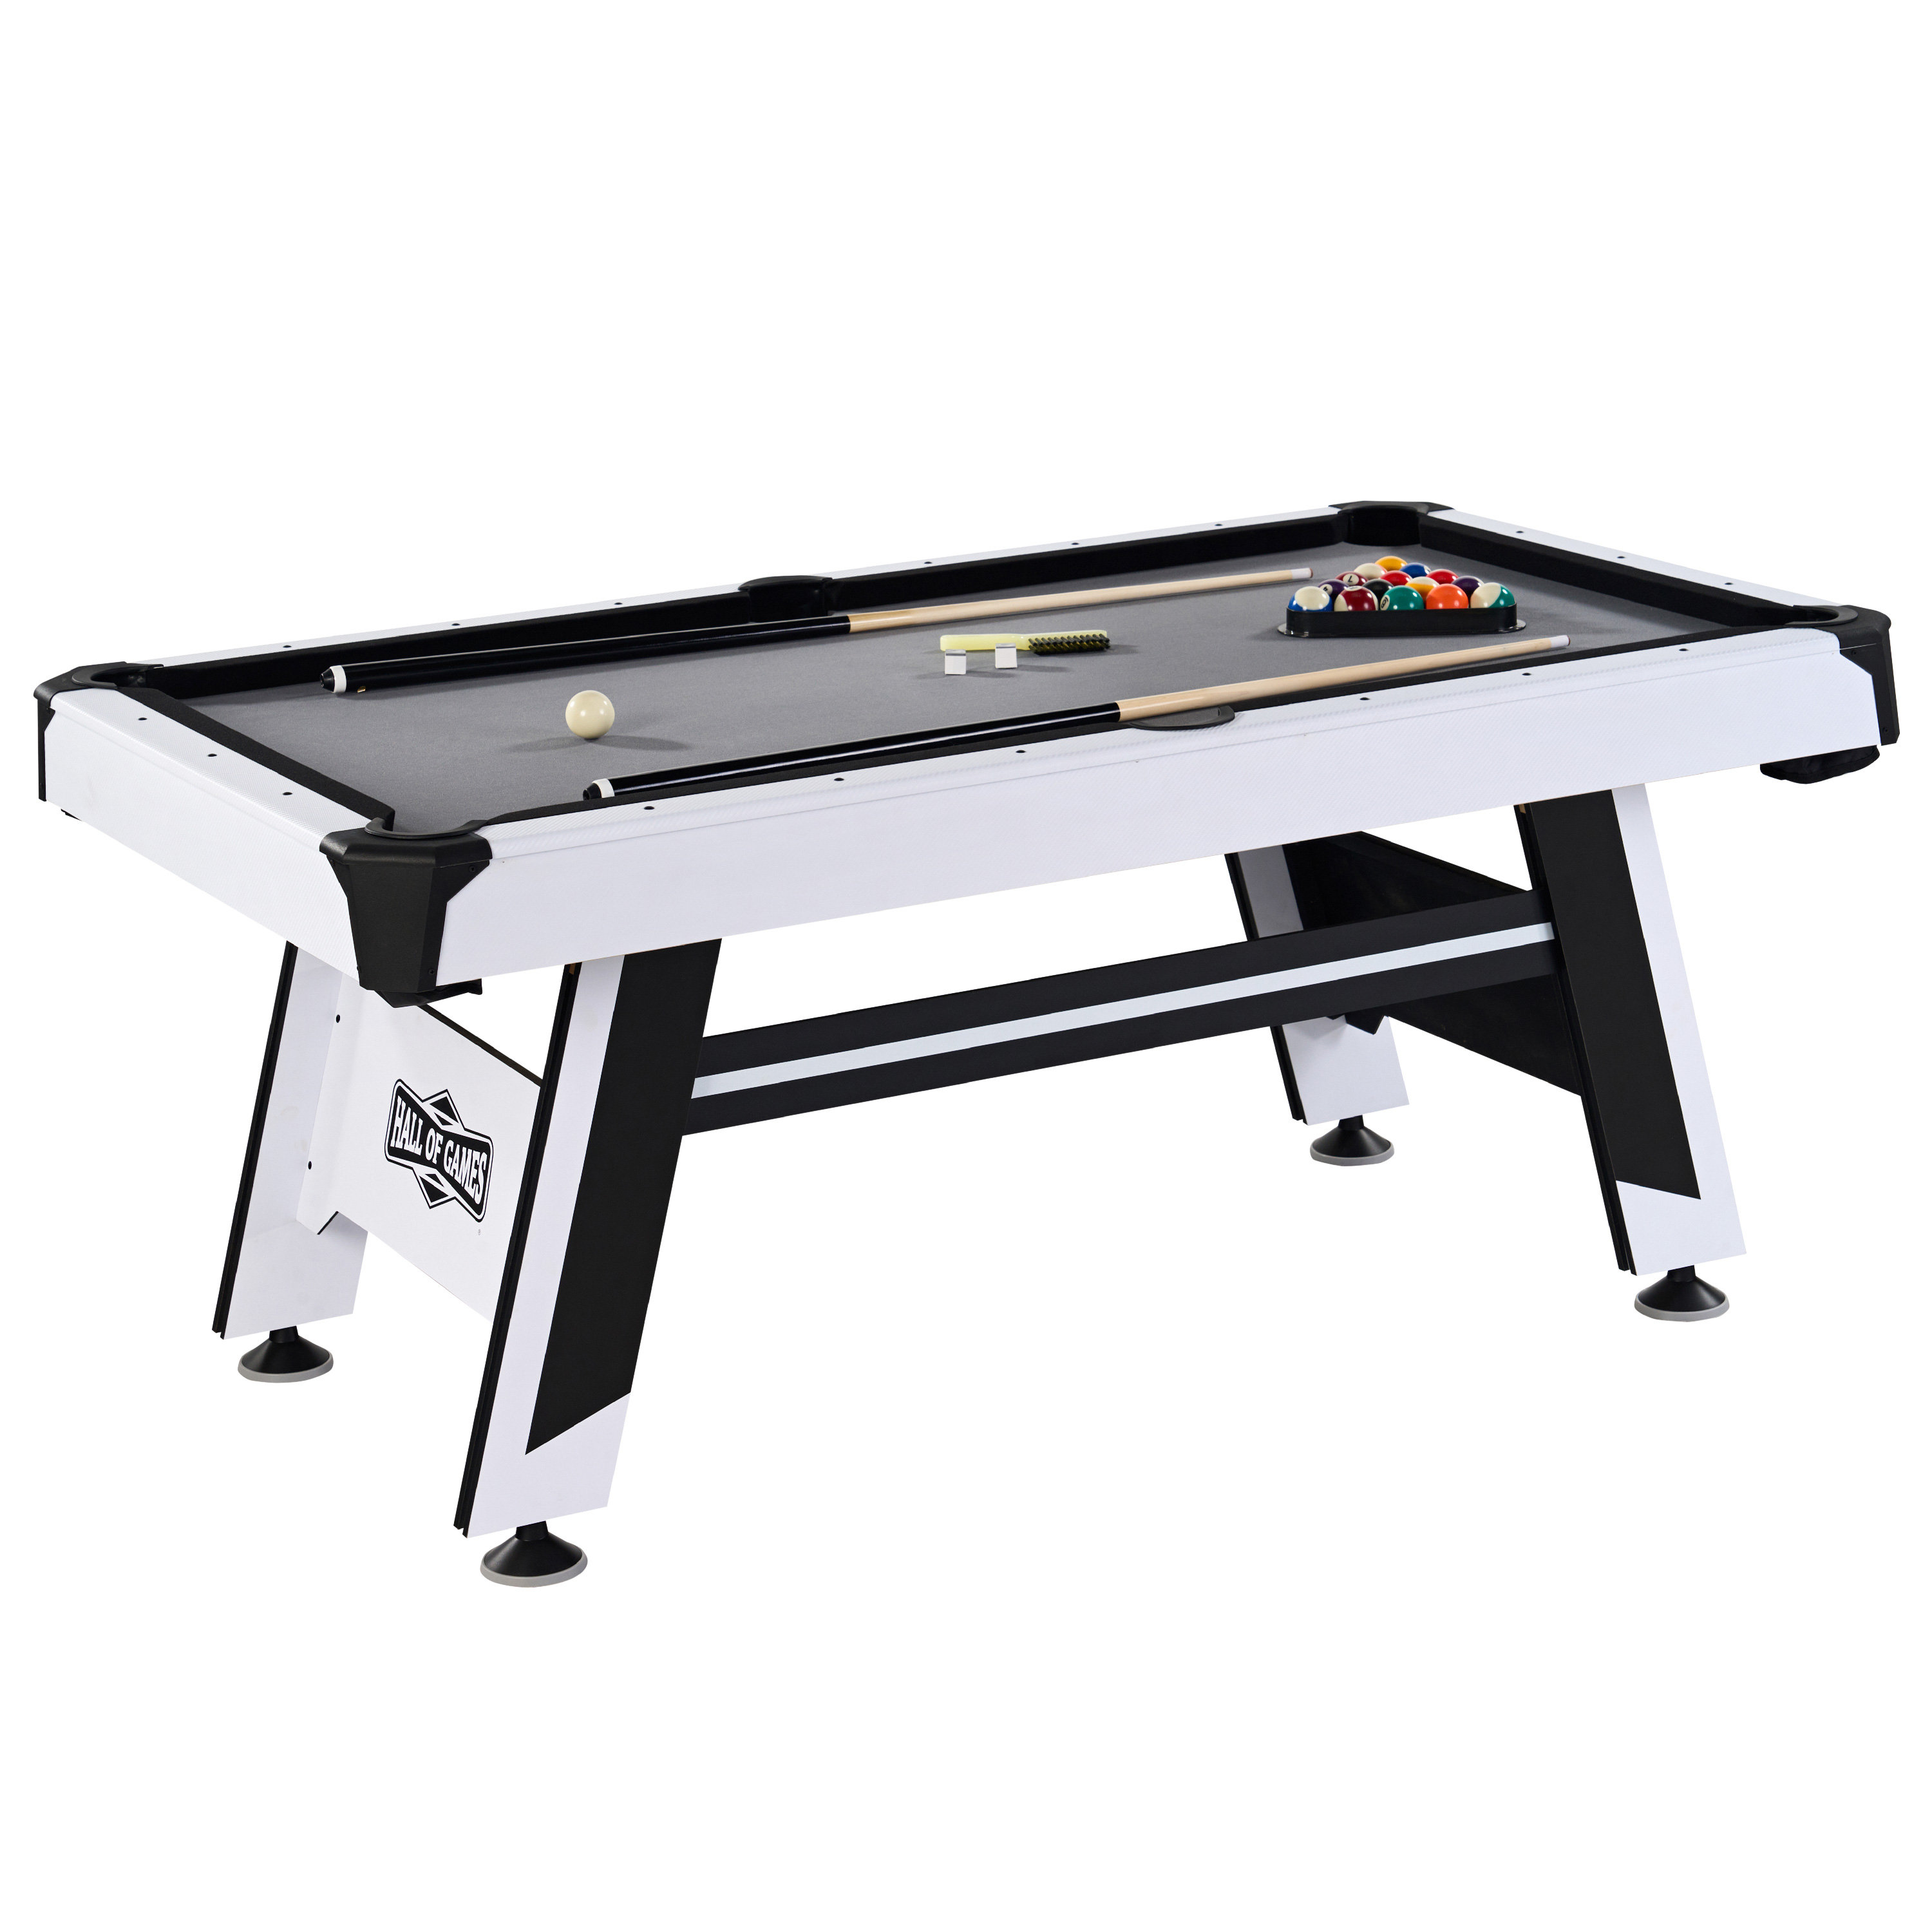 Best Choice Products 4-in-1 Multi Game Table, Childrens Combination Arcade  Set for Home, Play Room, Rec Room w/Pool Billiards, Air Hockey, Foosball